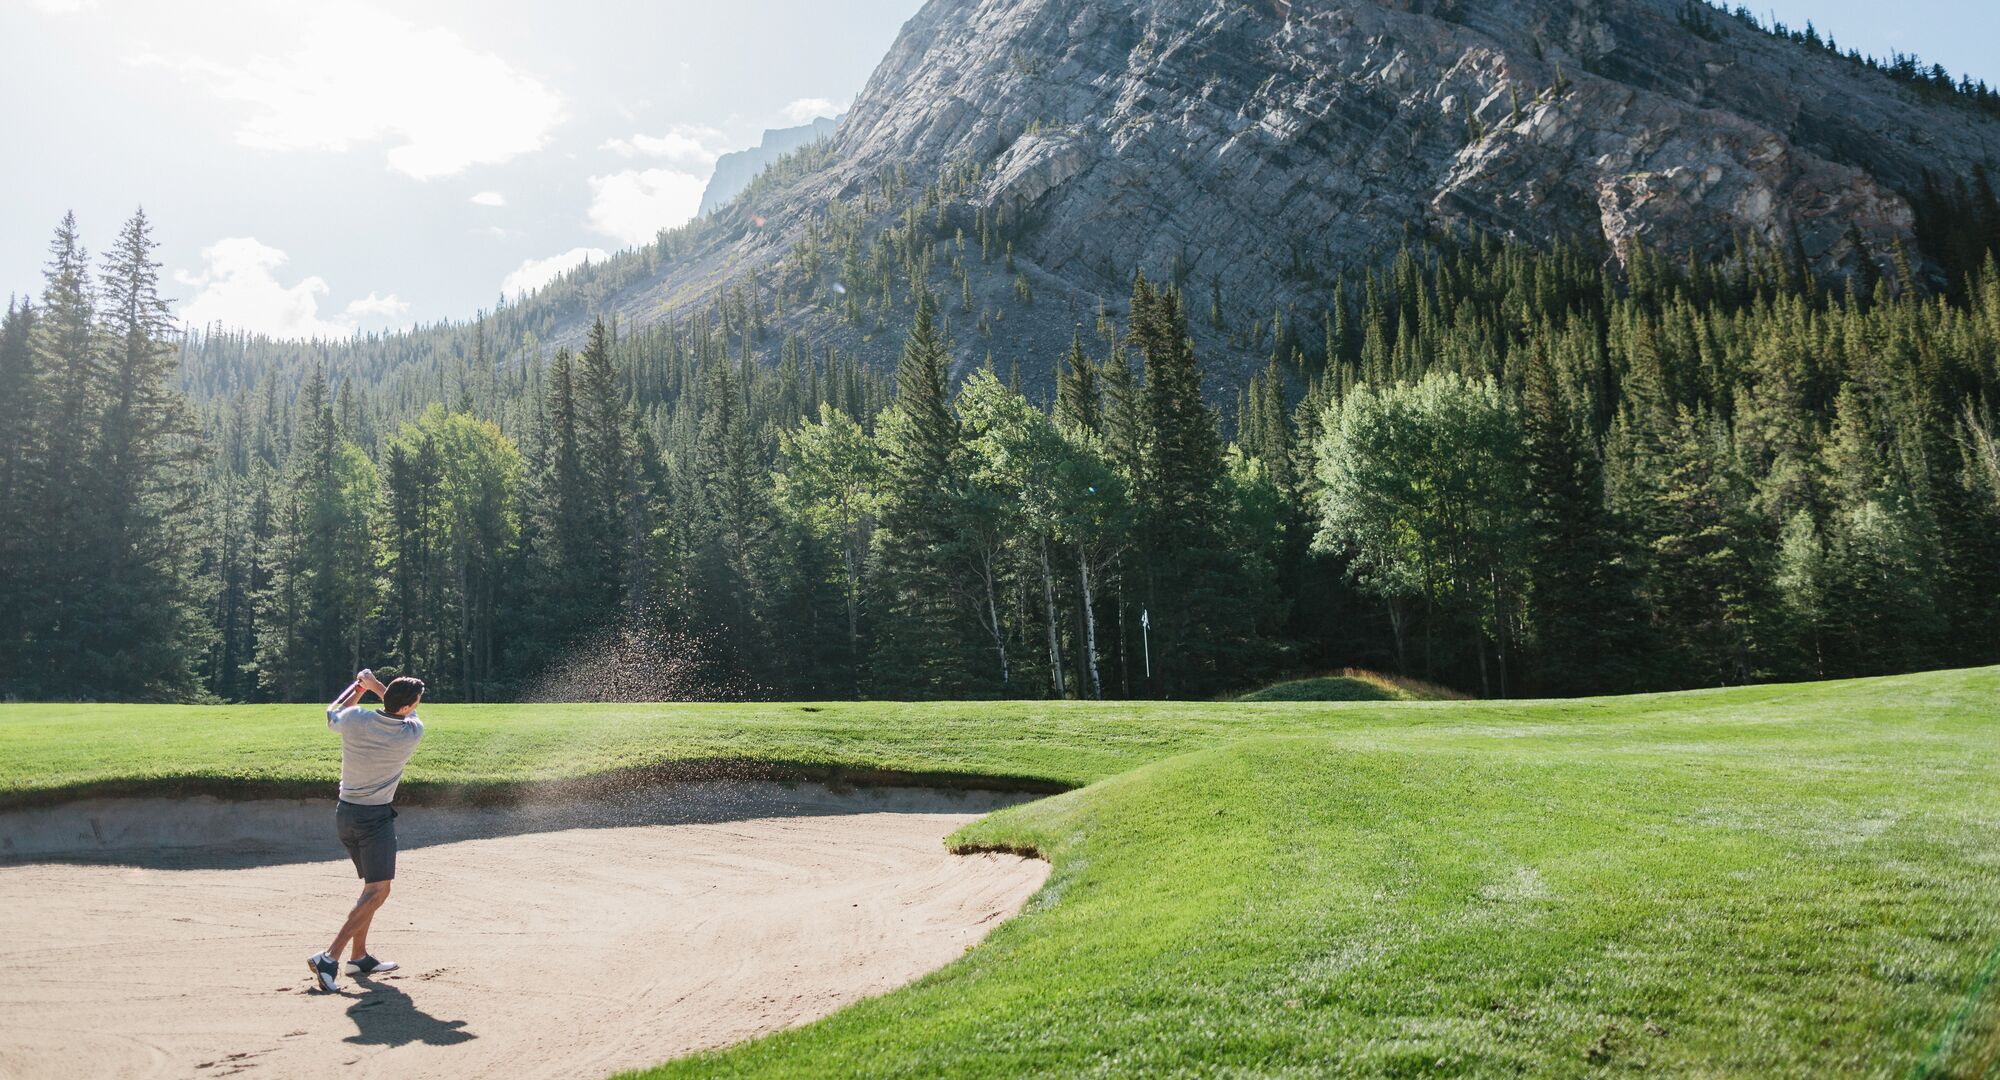 A man playing golf at the Fairmont Banff Springs Golf Course on a sunny day surrounded by trees and mountains